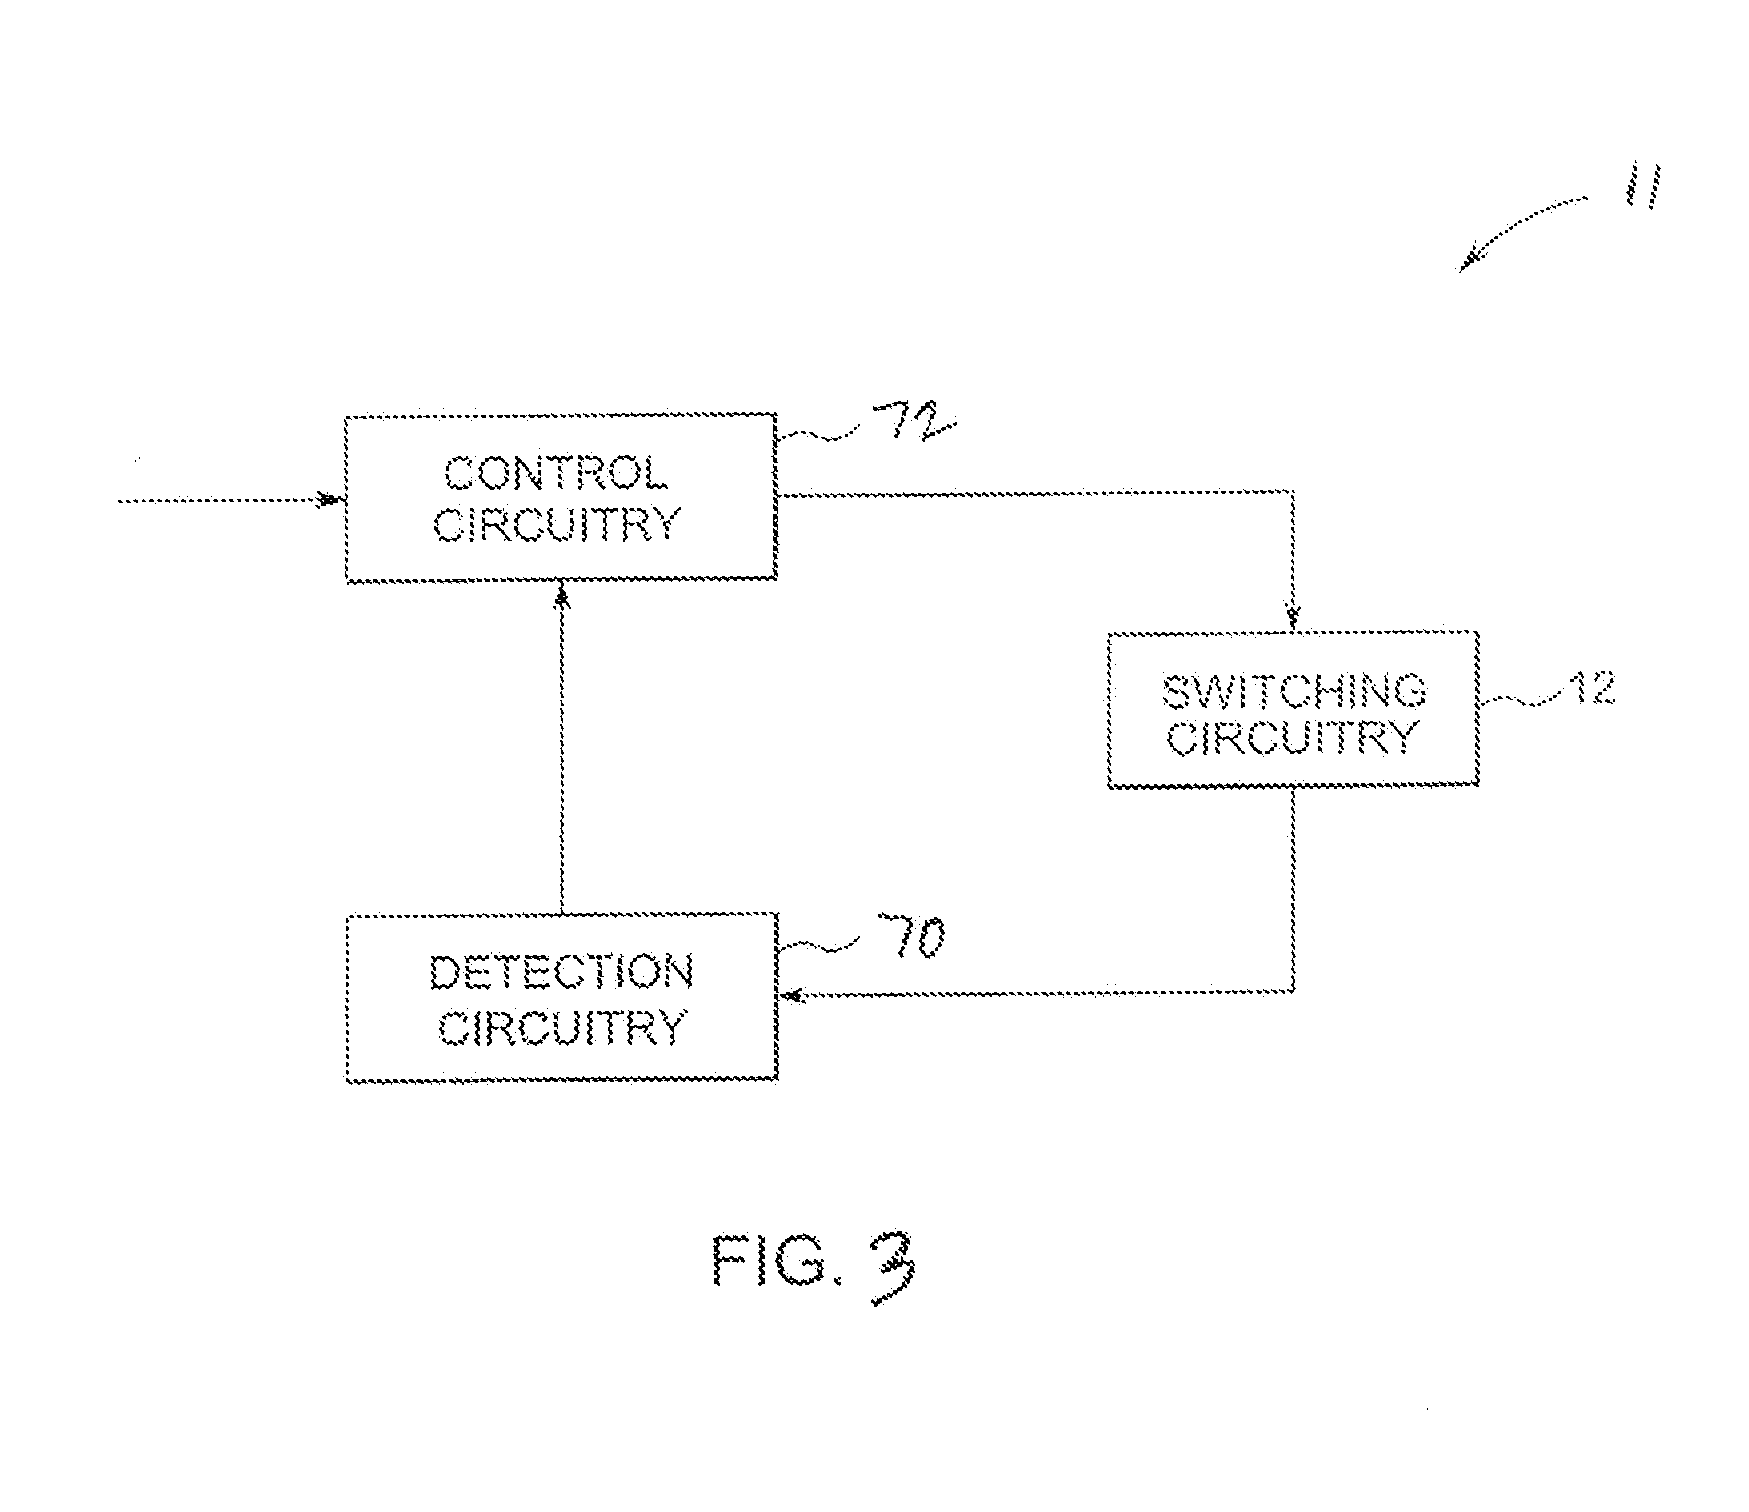 Resettable MEMS micro-switch array based on current limiting apparatus